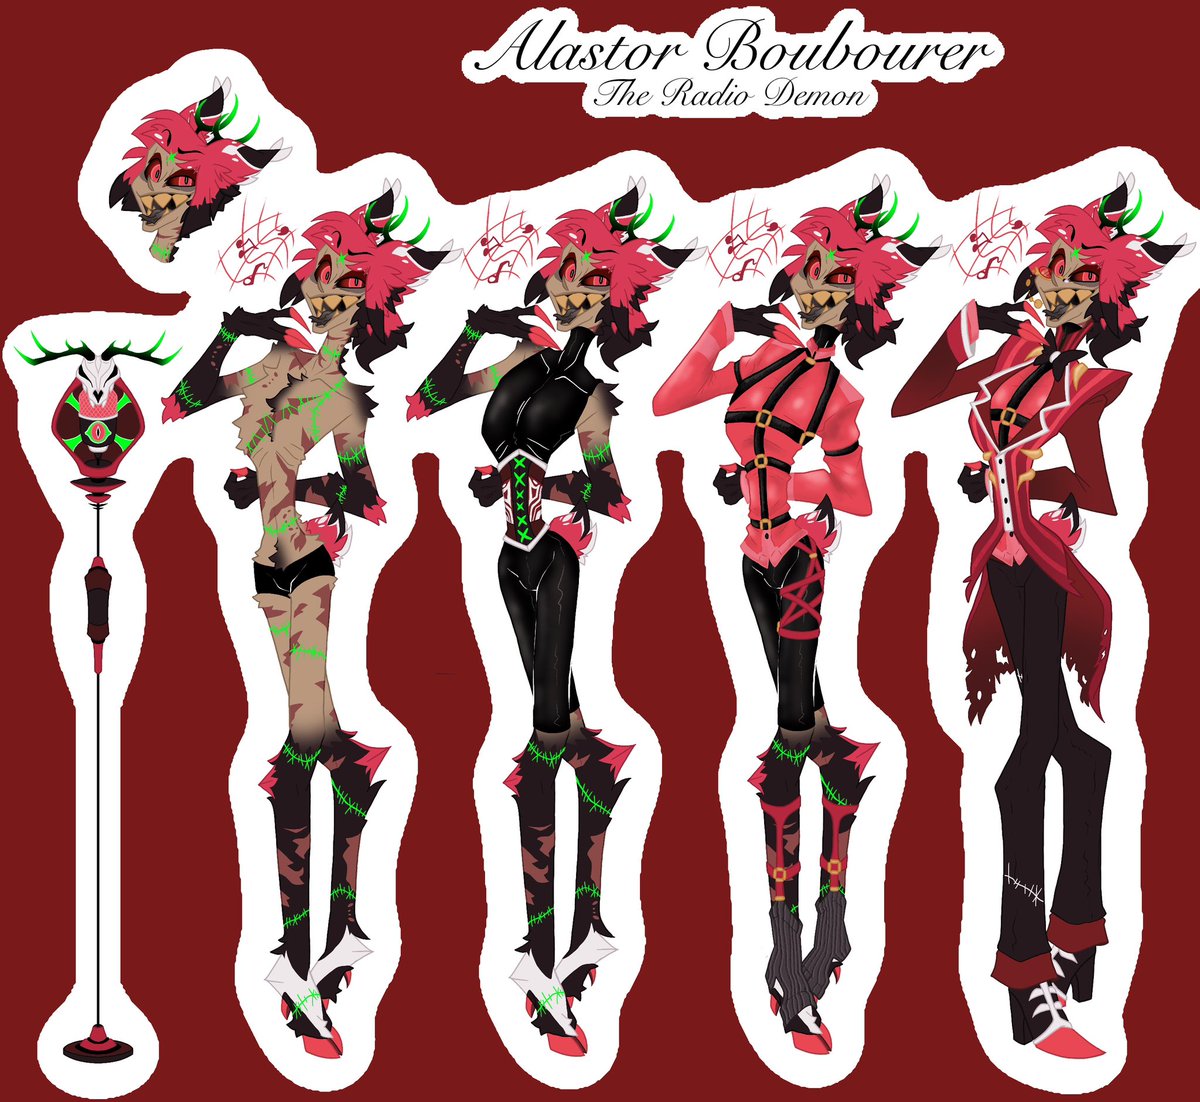 I think I’m officially happy with this one! Alastor Boubourer (It’s surname me and my partner came up with, I dunno it sounds creole I guess). Hope I did our man justice! #HazbinHotel #HazbinHotelAlastor #alastorhazbinhotel #AlastorFanart #Alastor #redesign